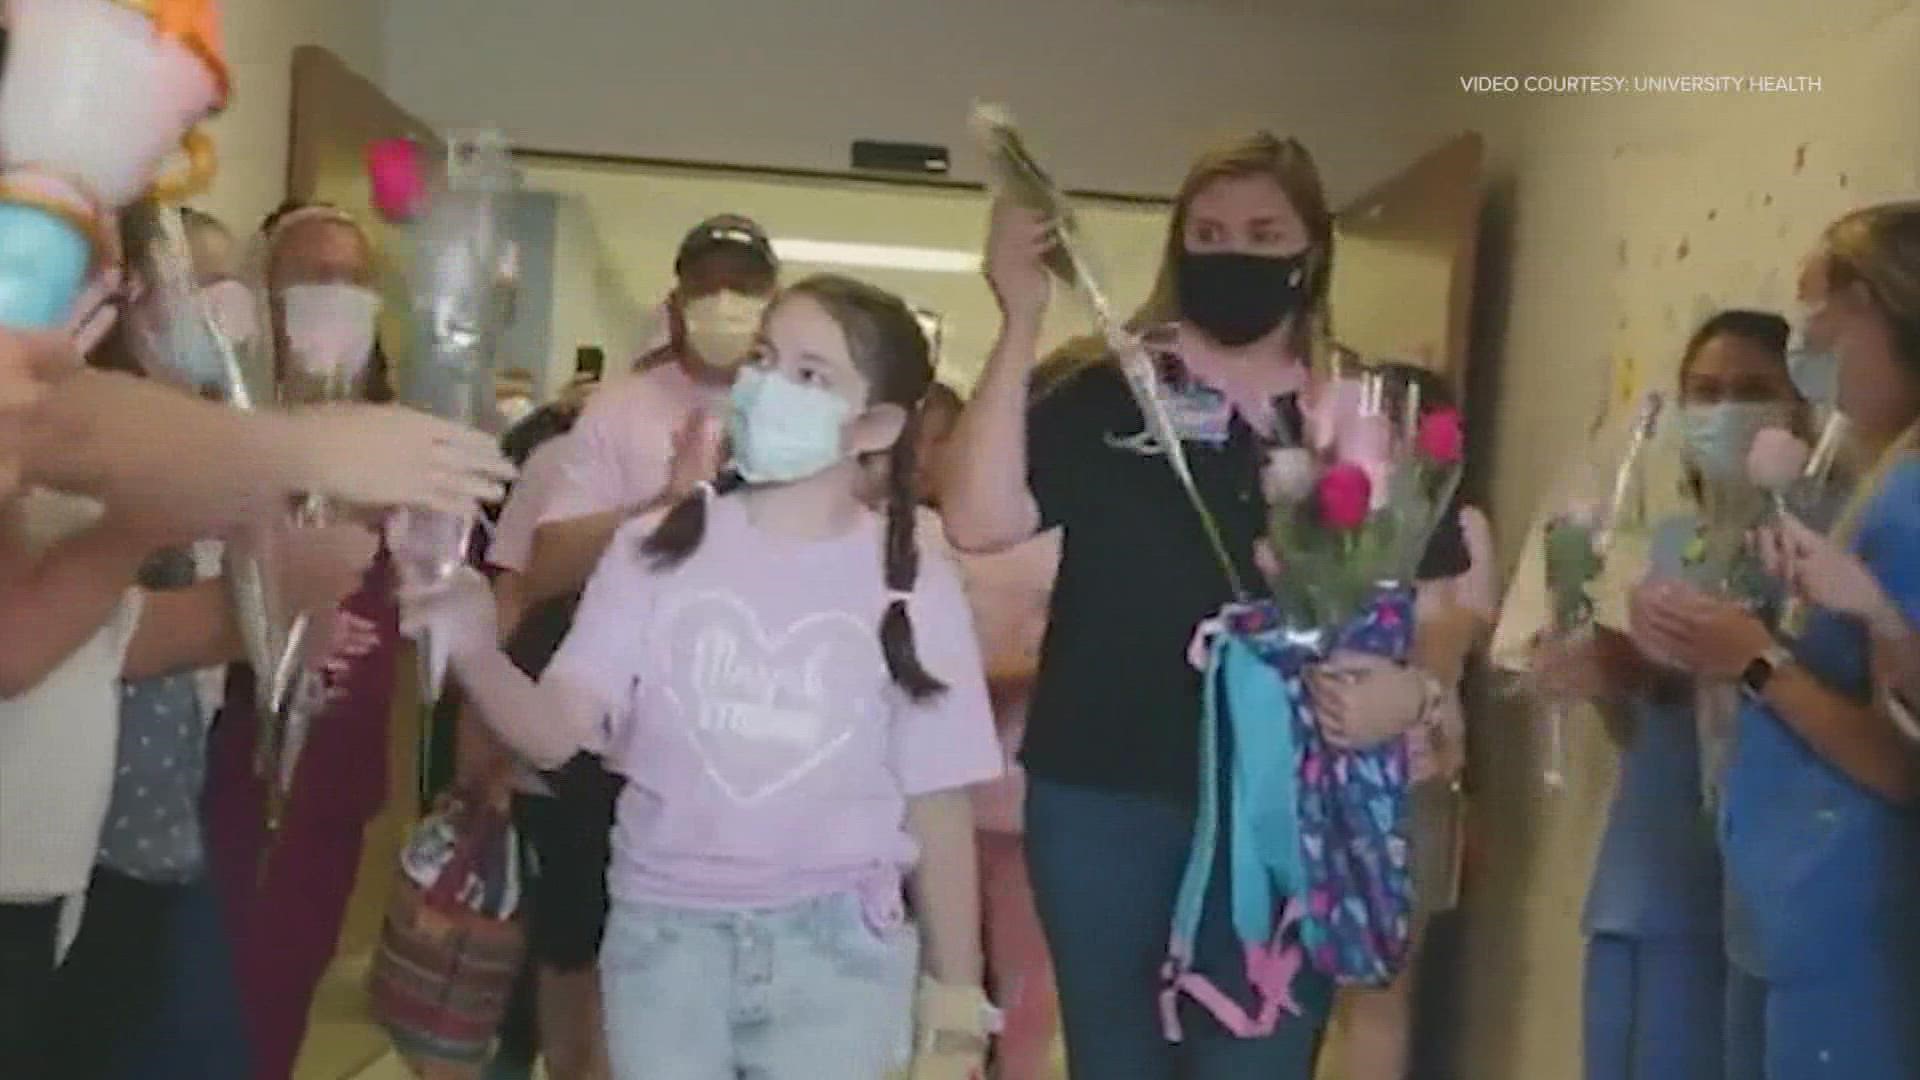 The last Uvalde shooting survivor, 10-year-old Mayah Zamora, was released from the hospital Friday, July 29 after two months.